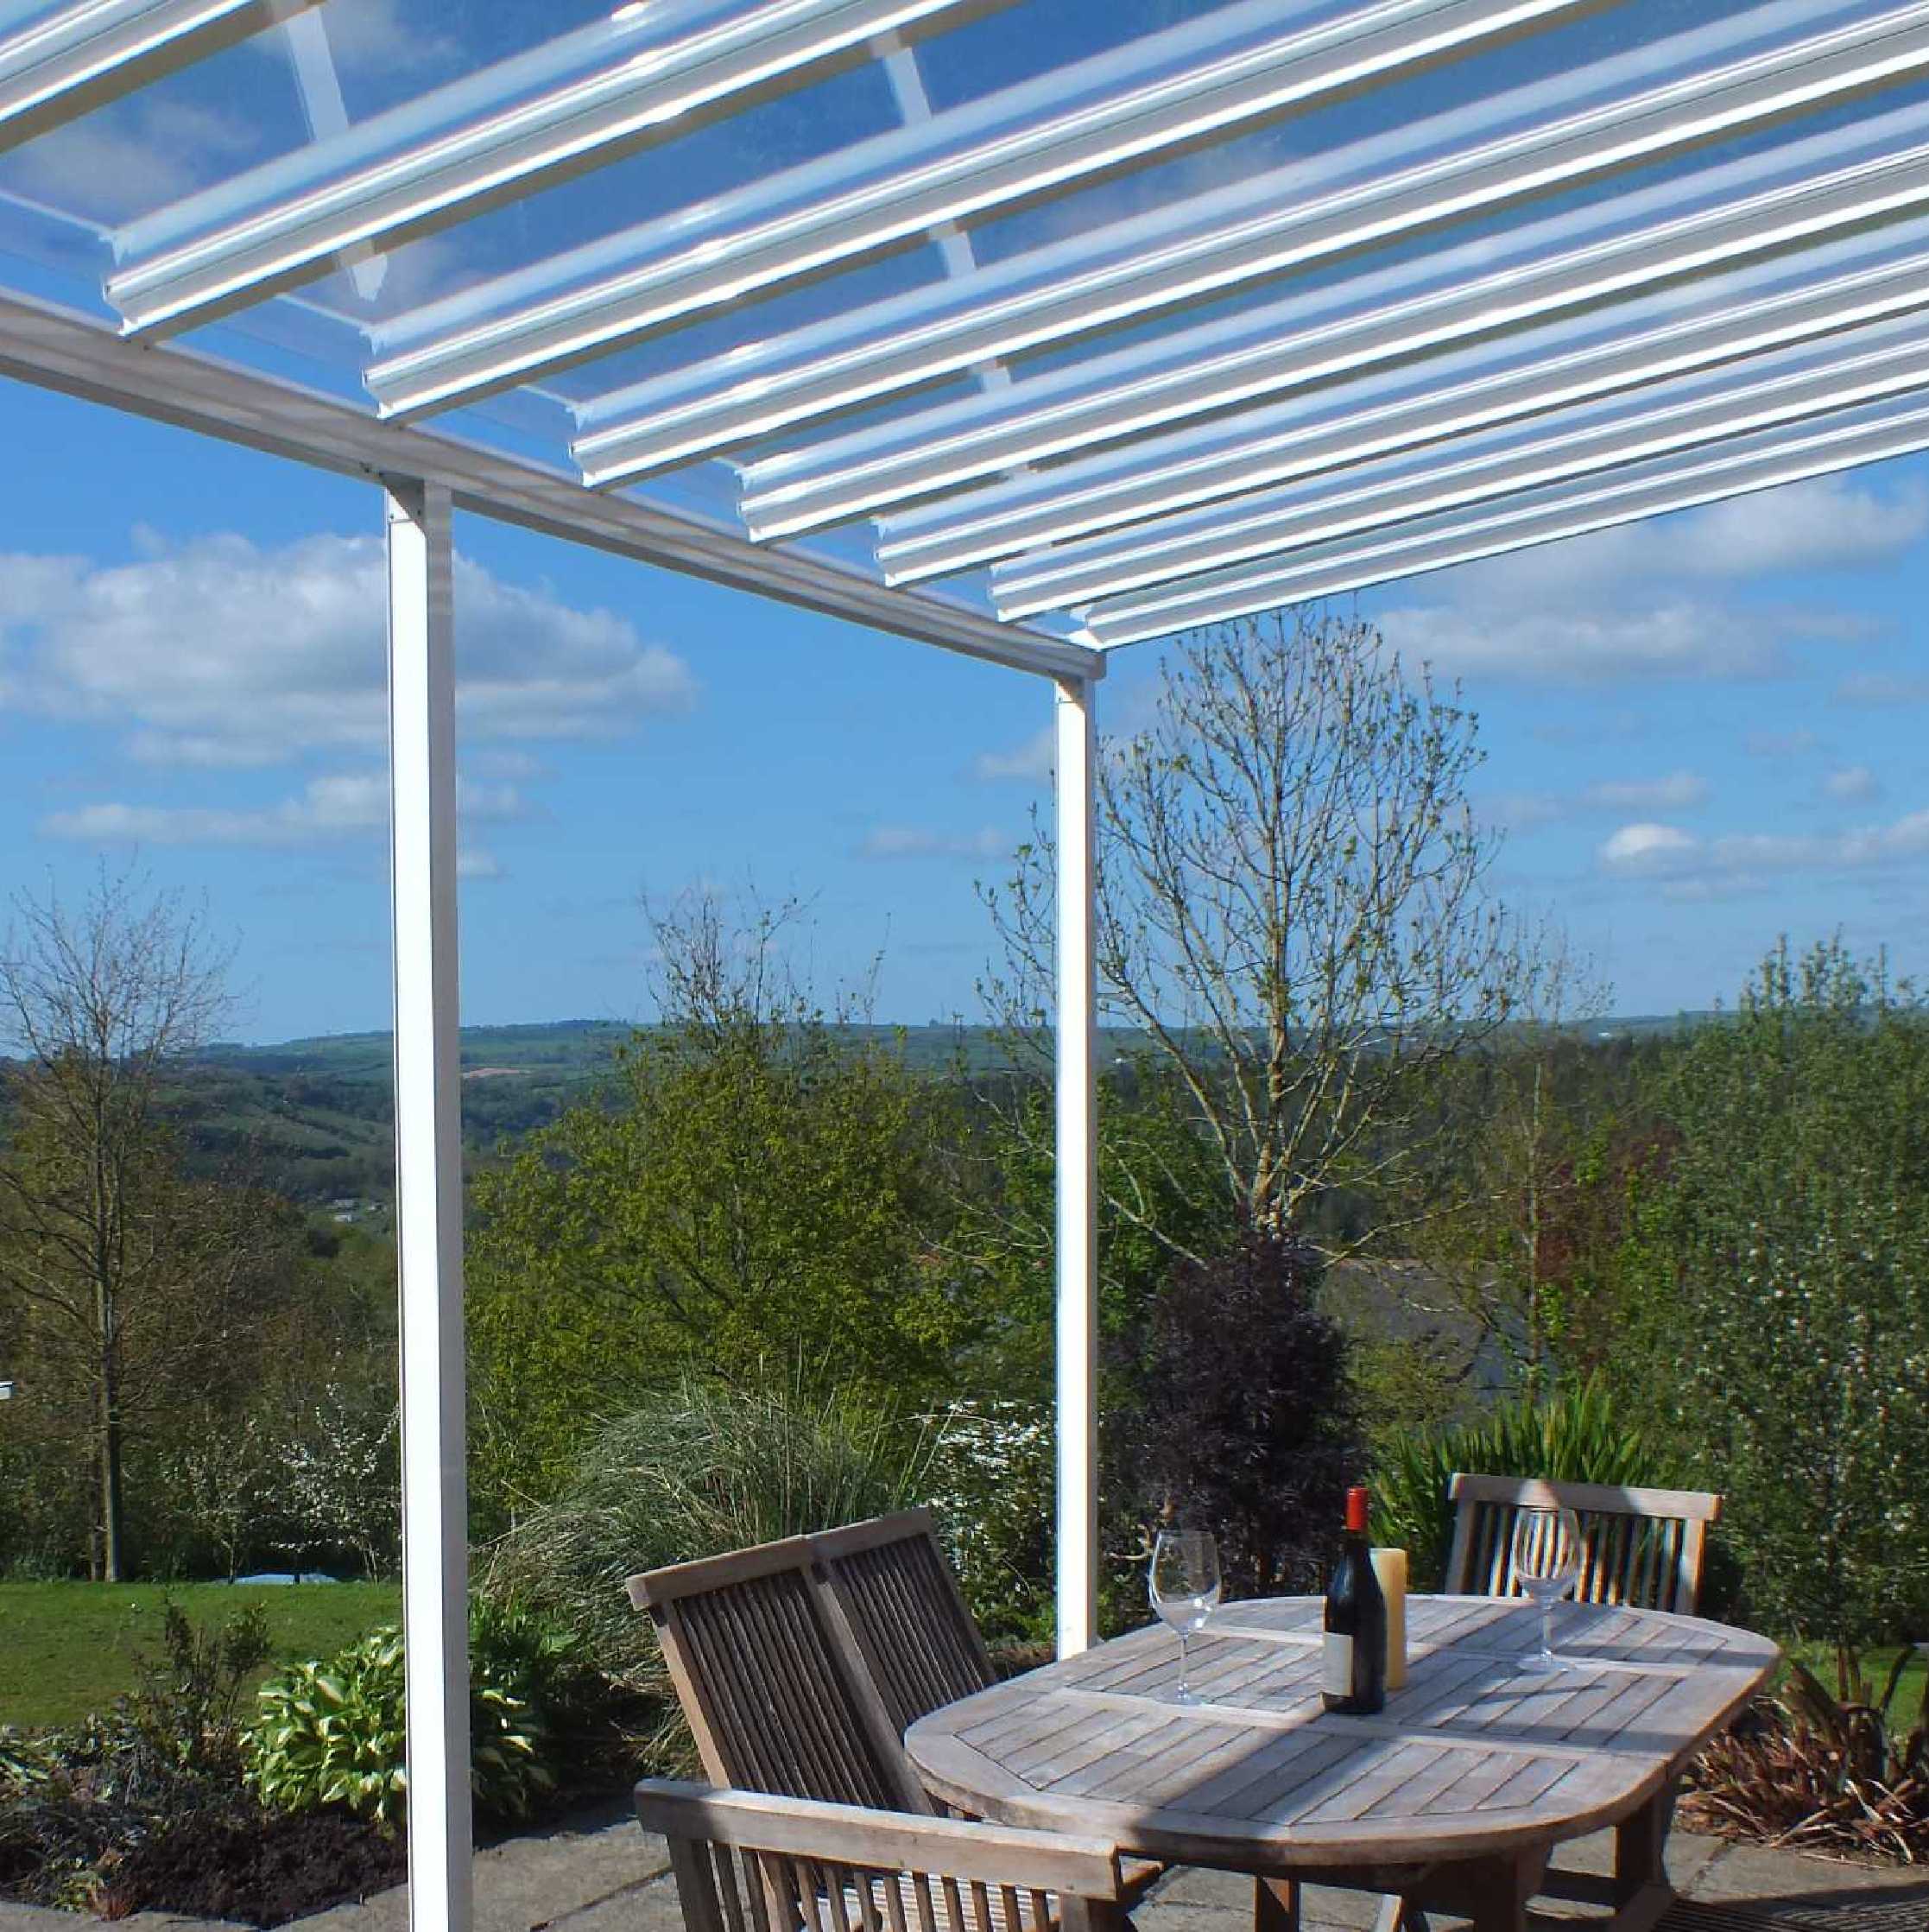 Buy Omega Smart Lean-To Canopy, White with 6mm Glass Clear Plate Polycarbonate Glazing - 7.4m (W) x 4.0m (P), (4) Supporting Posts online today